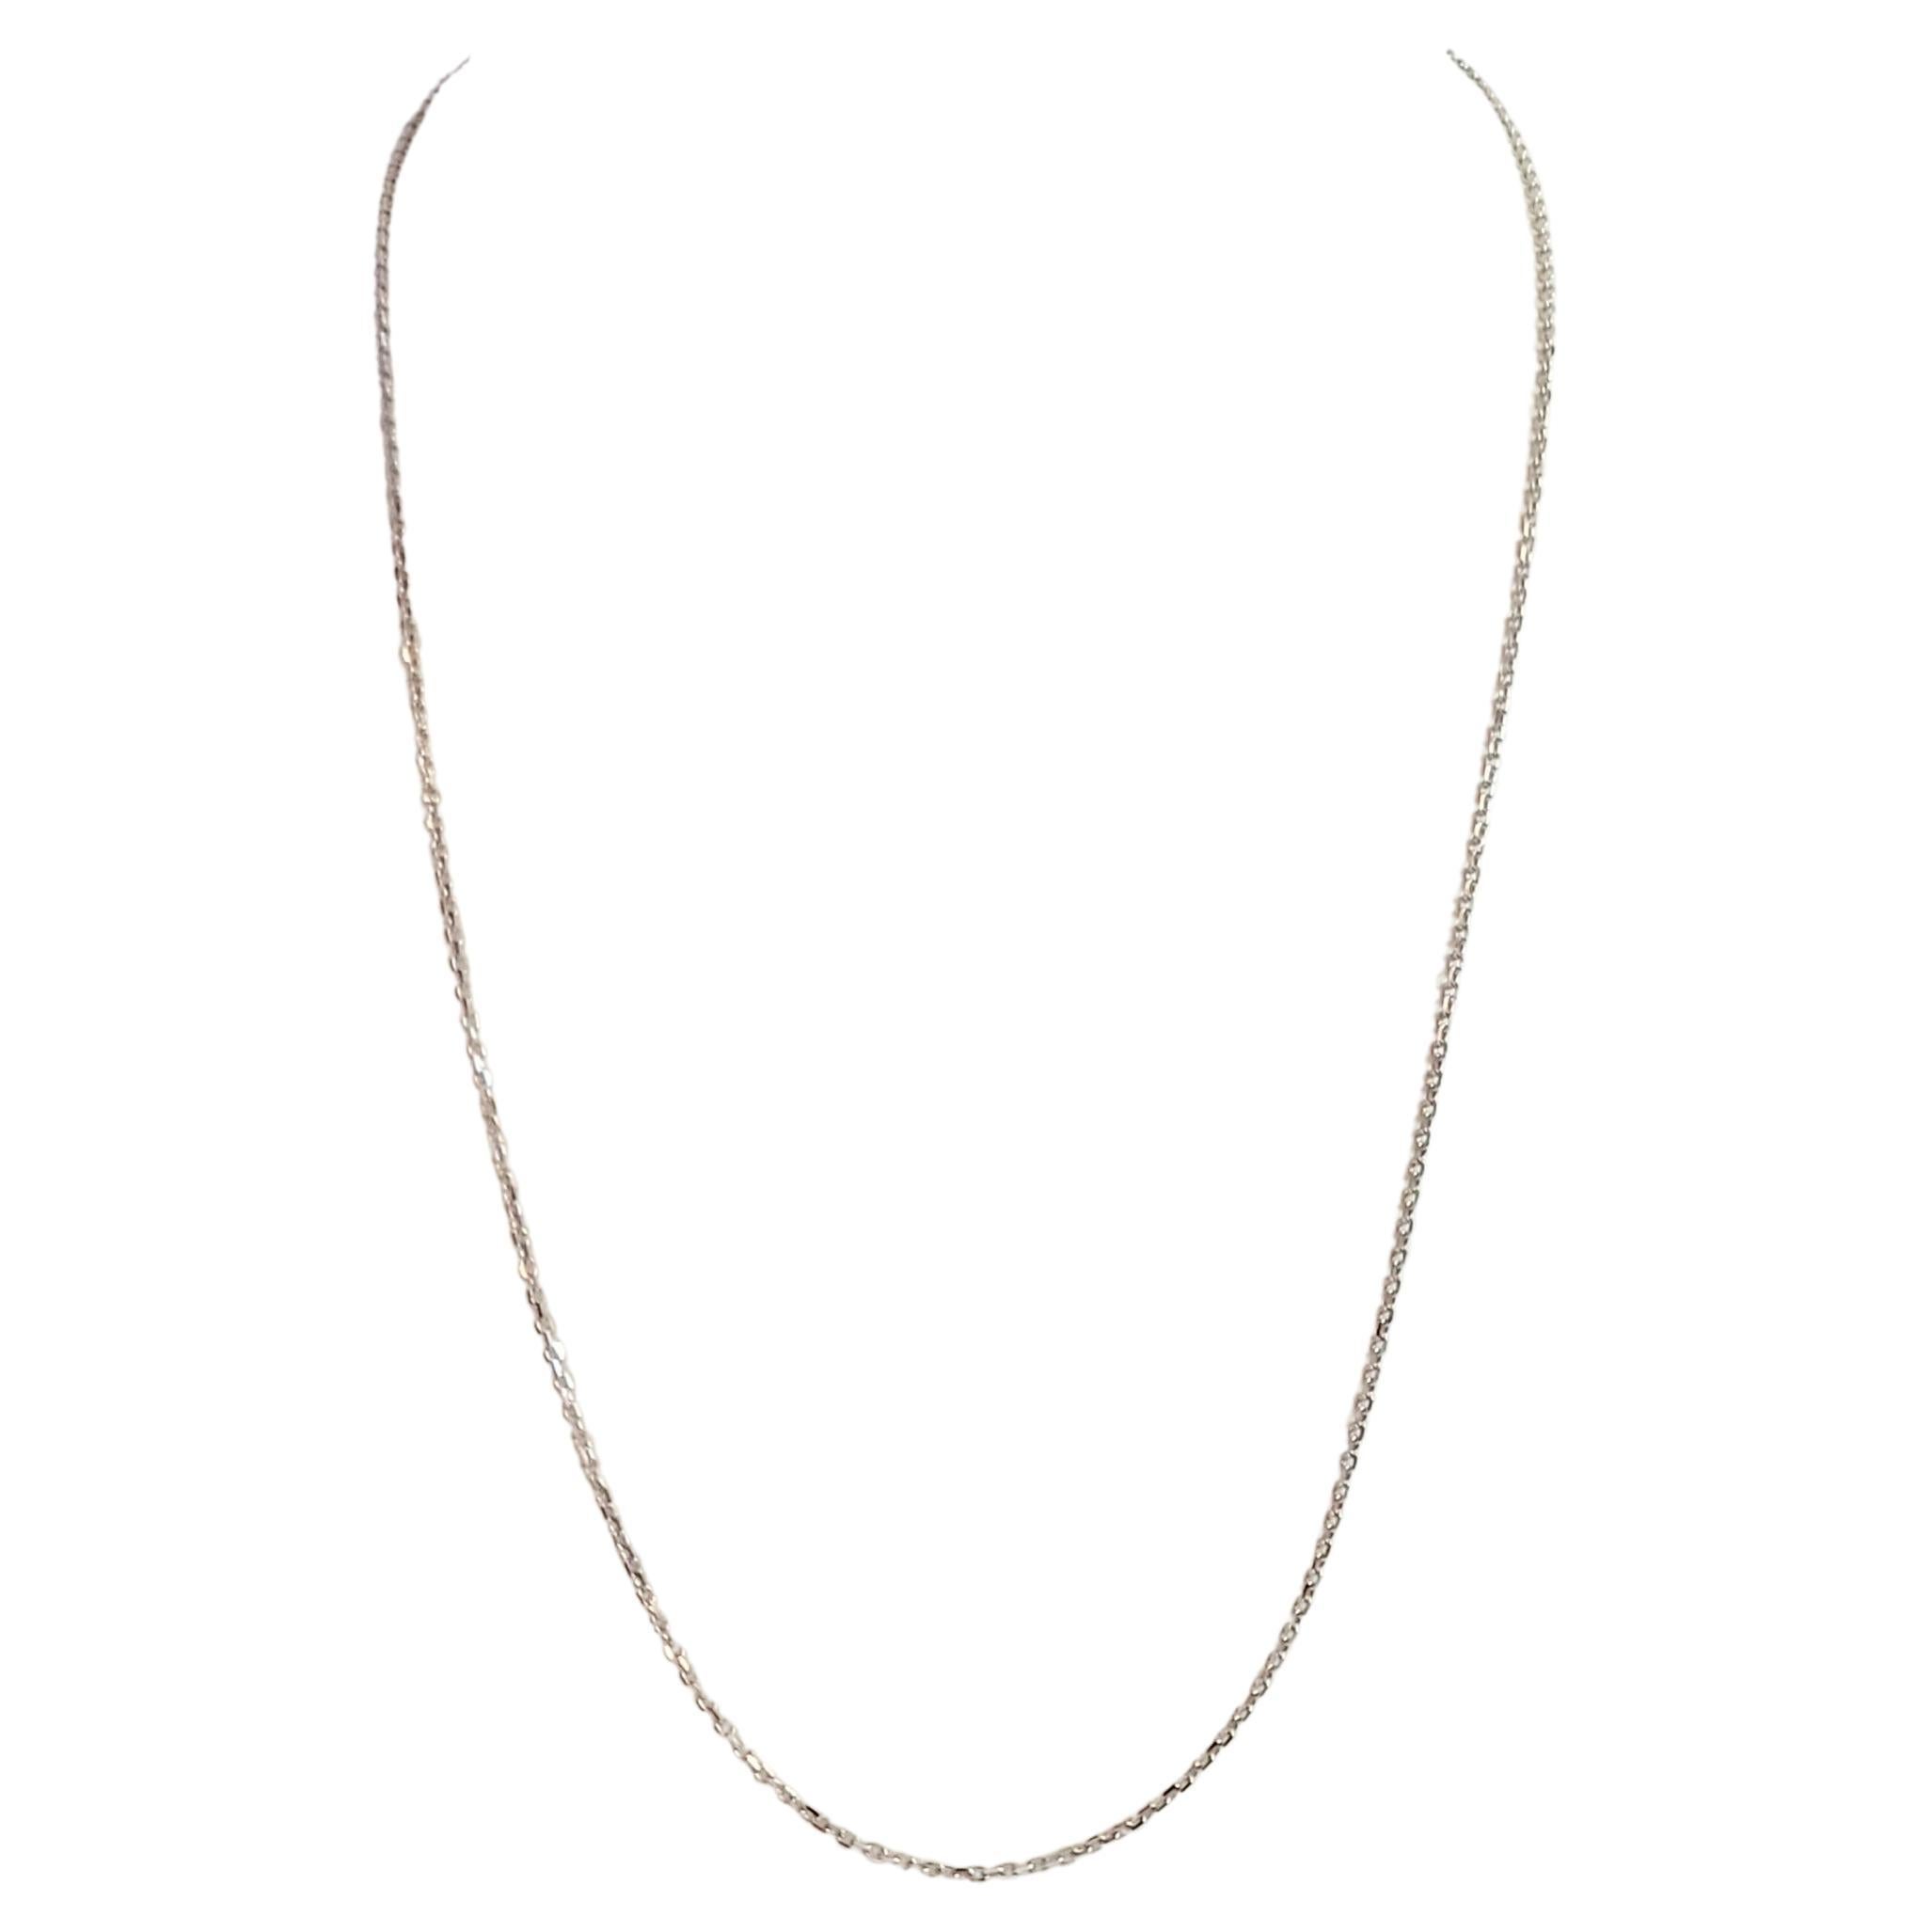 Tiffany & co PT950 Gold chain 20" For Sale